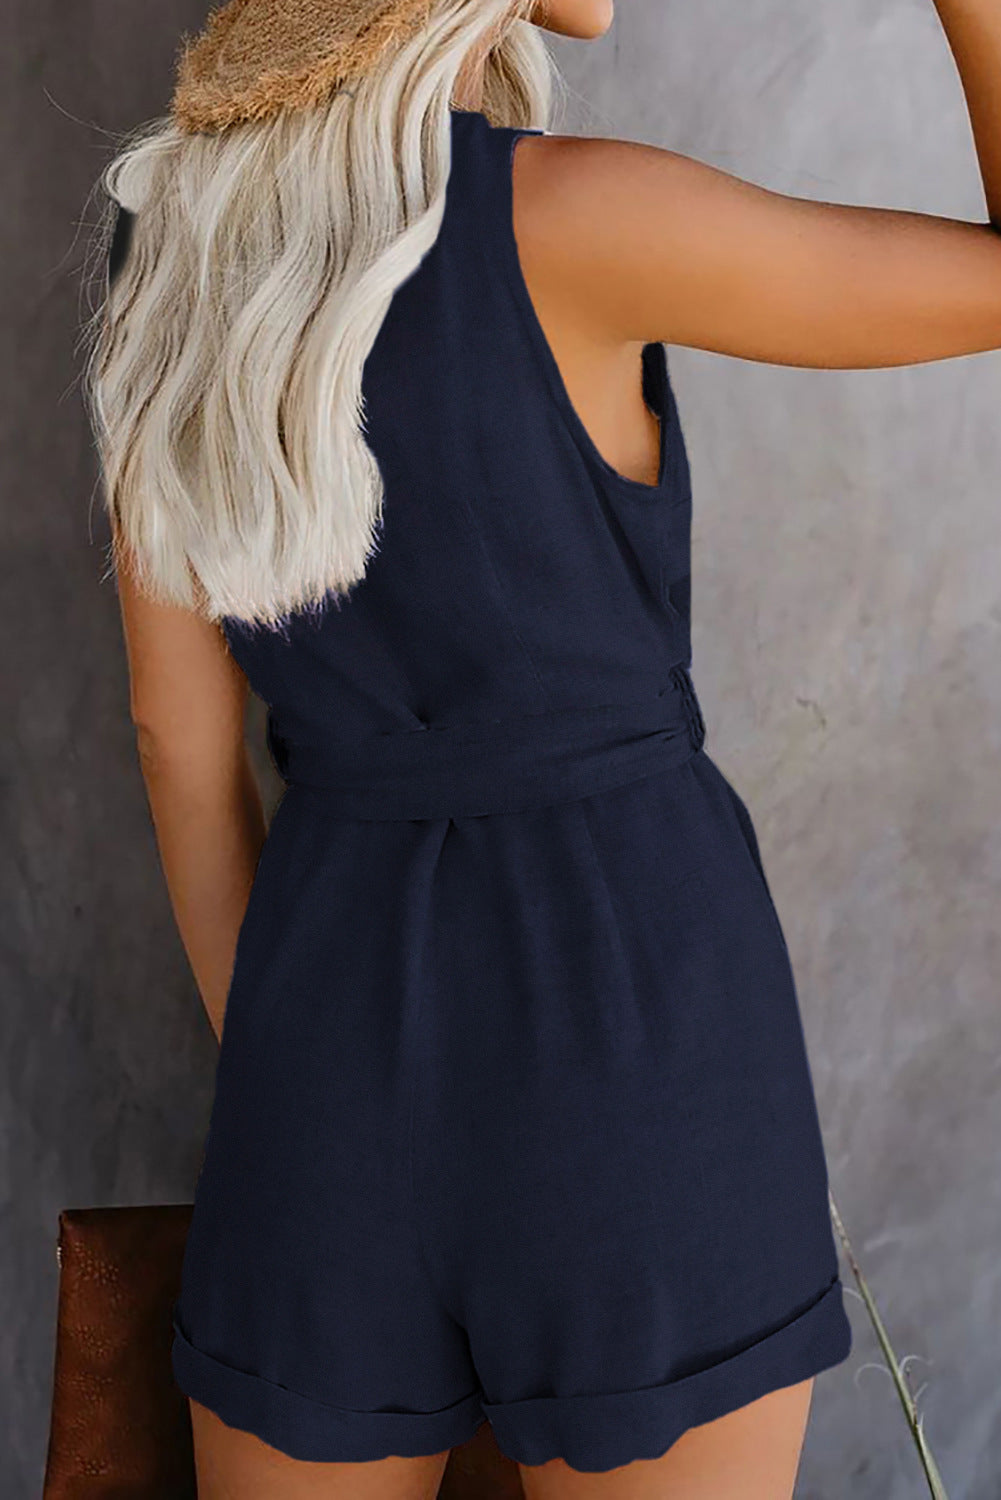 V Neck Sleeveless Button Belt Bow Casual Jumpsuit